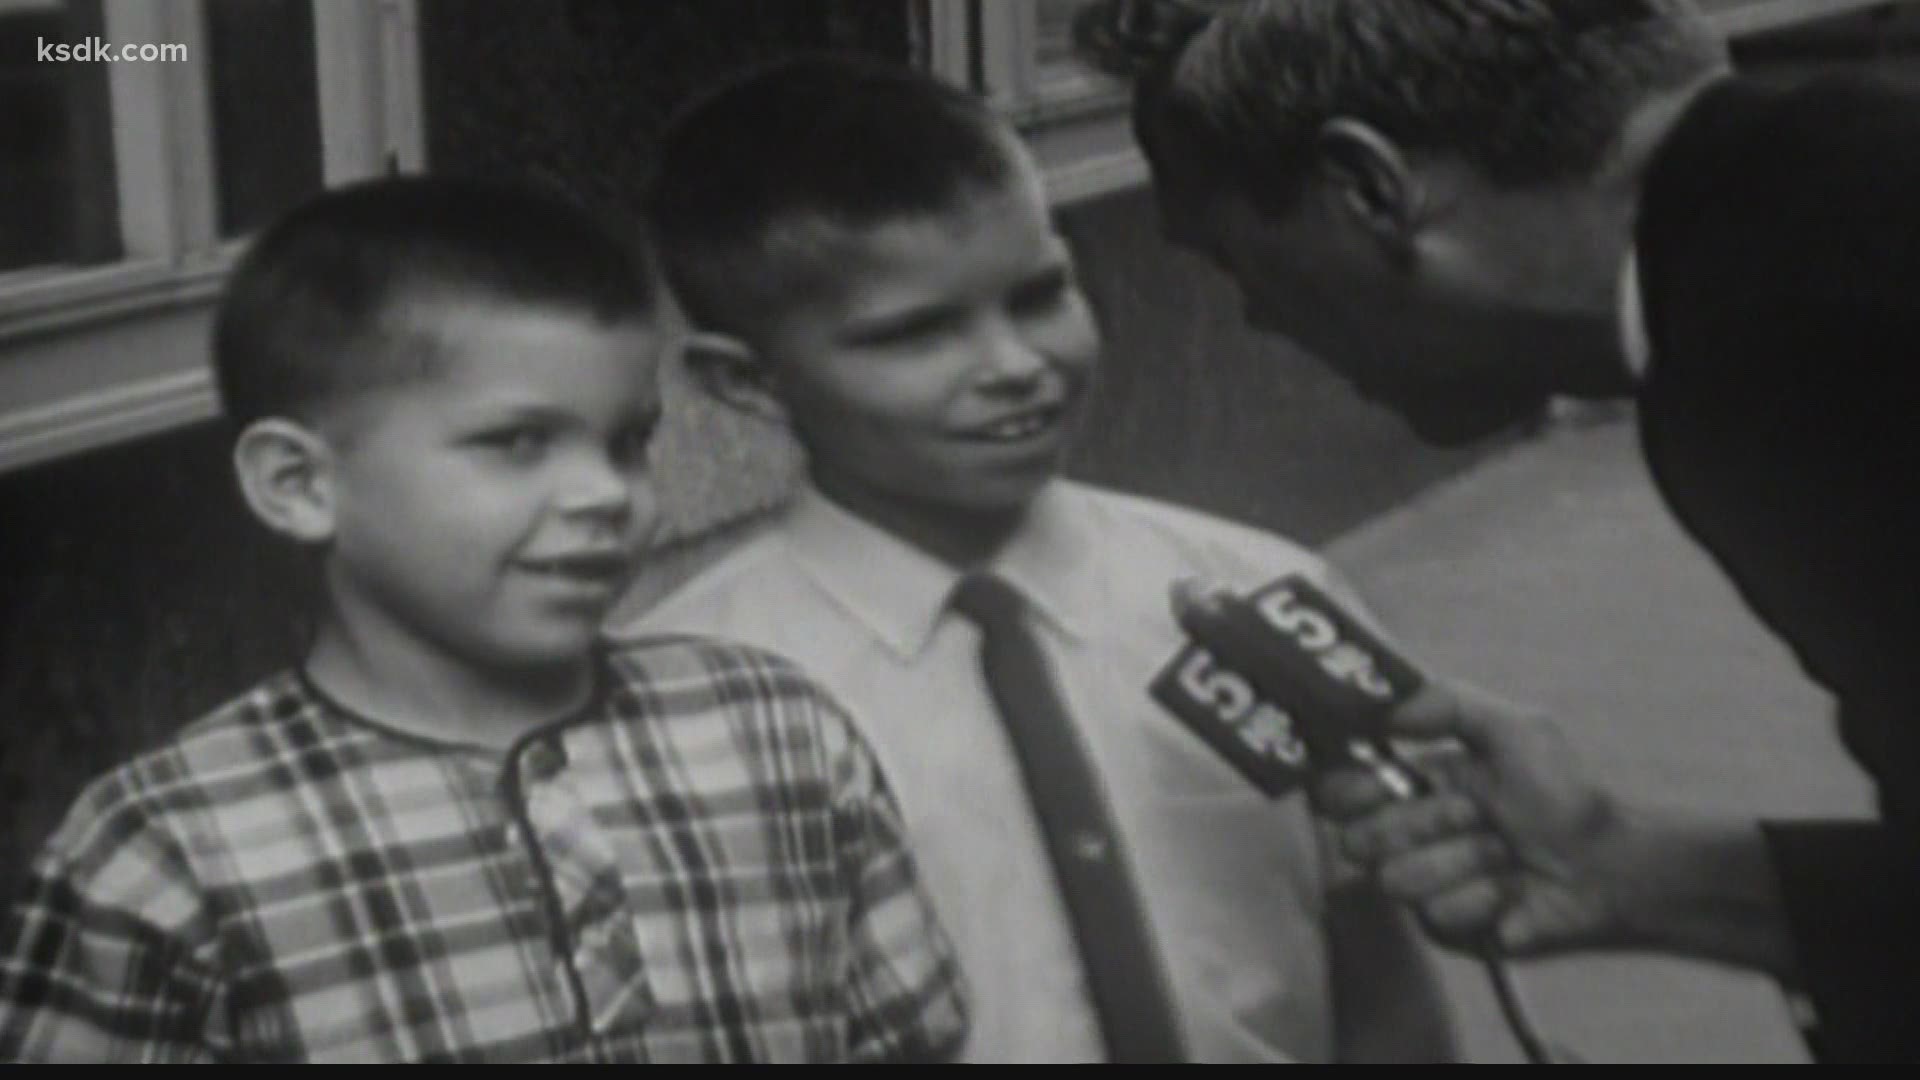 We dug back into the KSDK archives and found a story of a boy who had some very bad luck